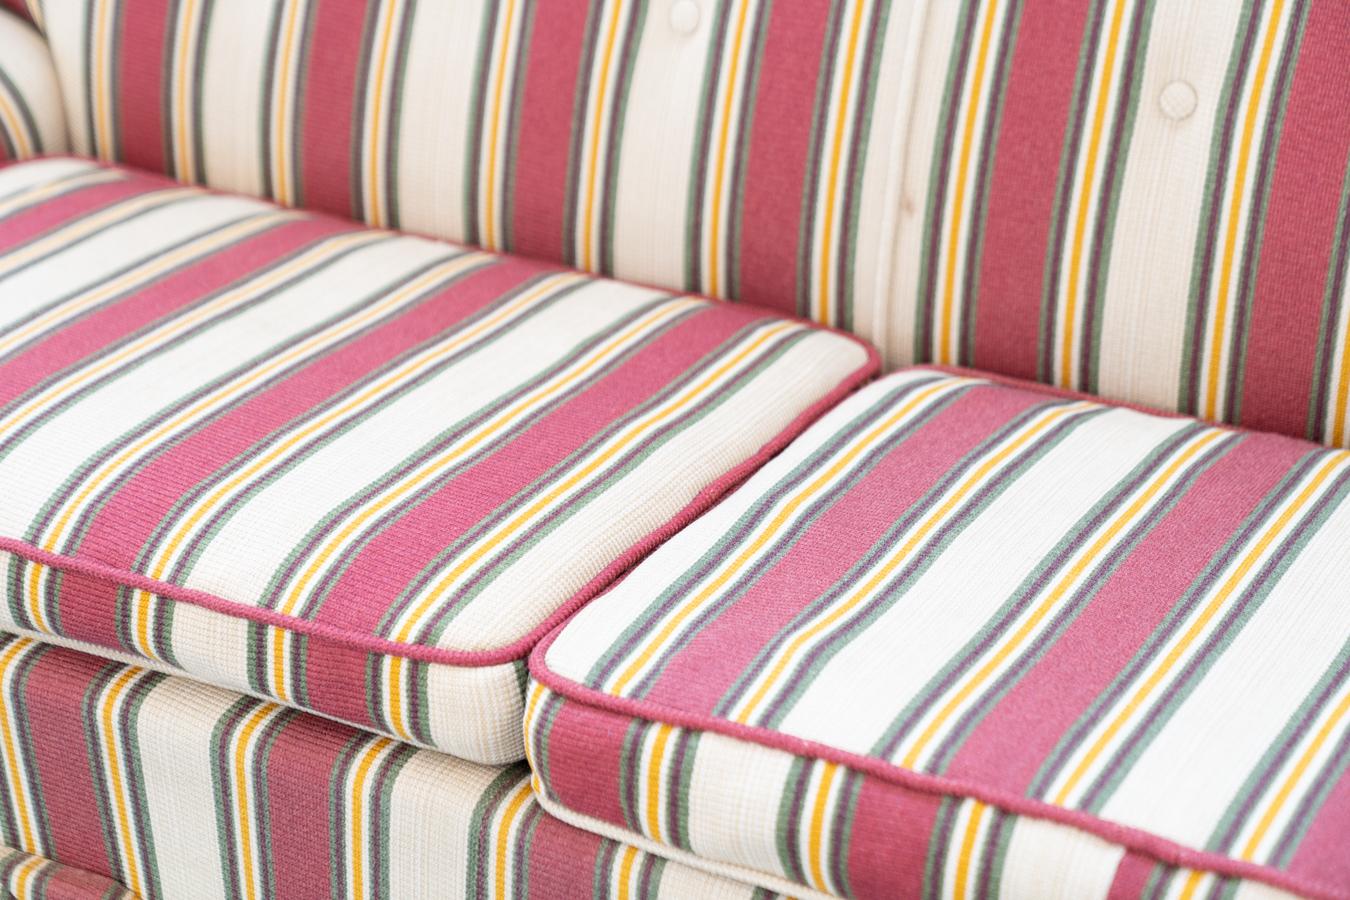 American sofa and armchair in original striped fabric1970s
Wooden frame, with the feet made of wood and brass
Style
Vintage
Periodo del design
1970 - 1979
Production Period
1970 - 1979
Year Manufactured
1970
Country of